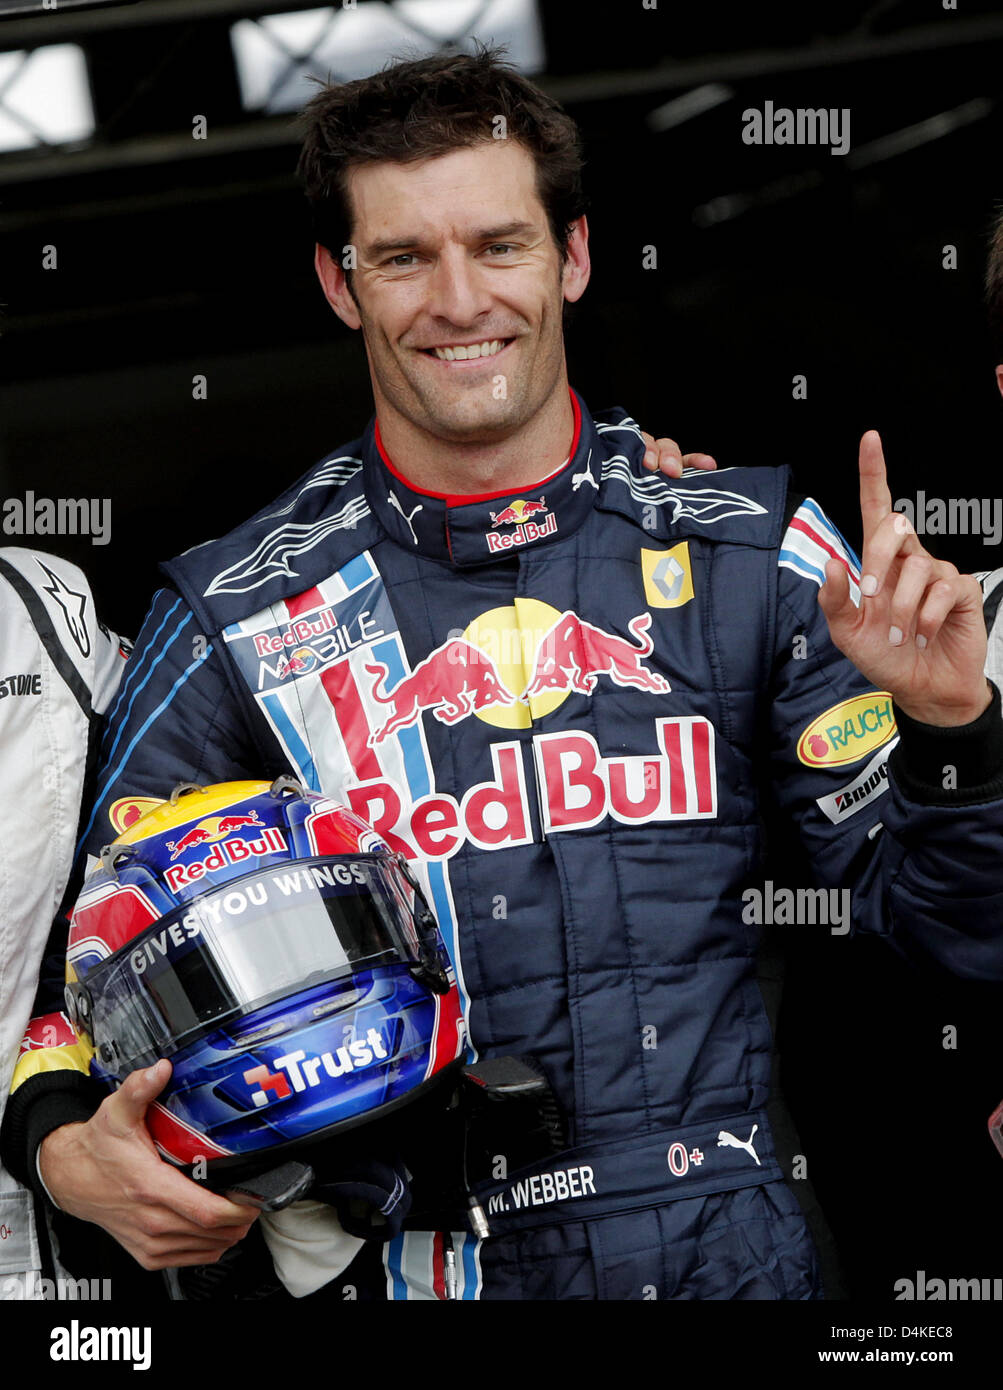 Gymnast høflighed Decimal Australian Formula One driver Mark Webber of Red Bull Racing cheers after  winning the qualifying at the Nurburgring in Nuerburg, Germany, 11 July  2009. The Formula 1 Grand Prix of Germany will